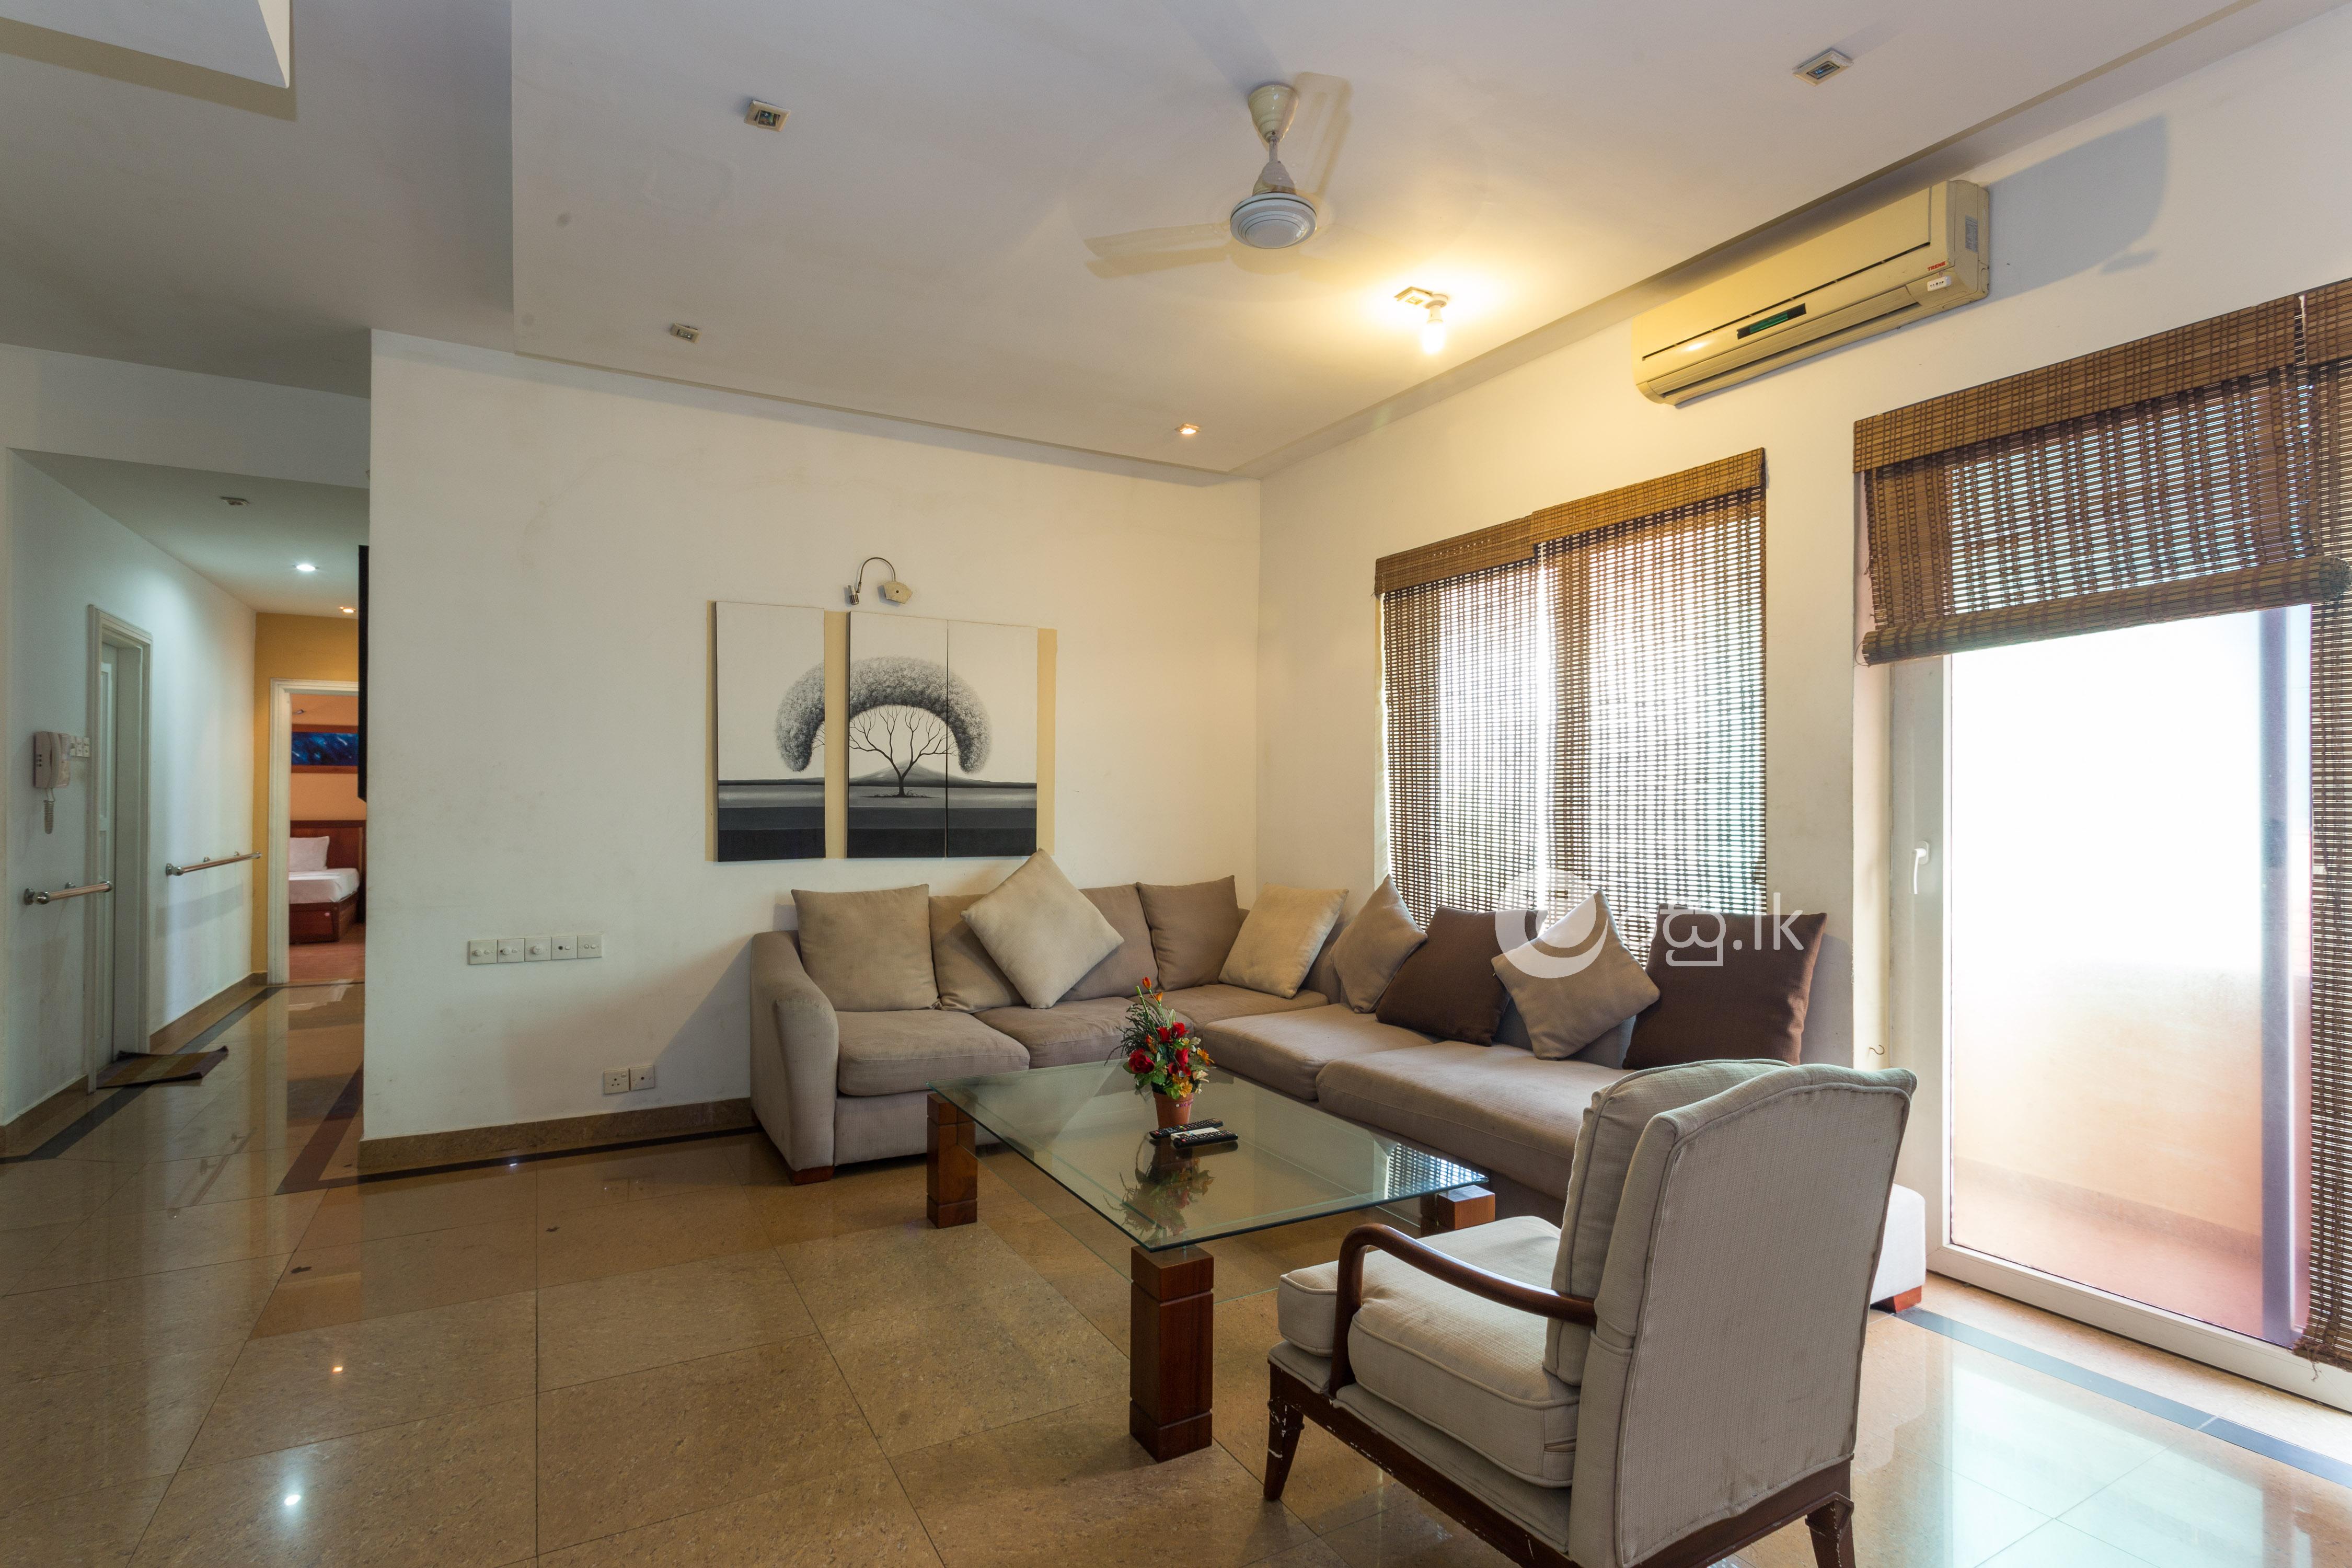 3 Bed Room Apartment with pool @ Col 3 Apartments in Wadduwa